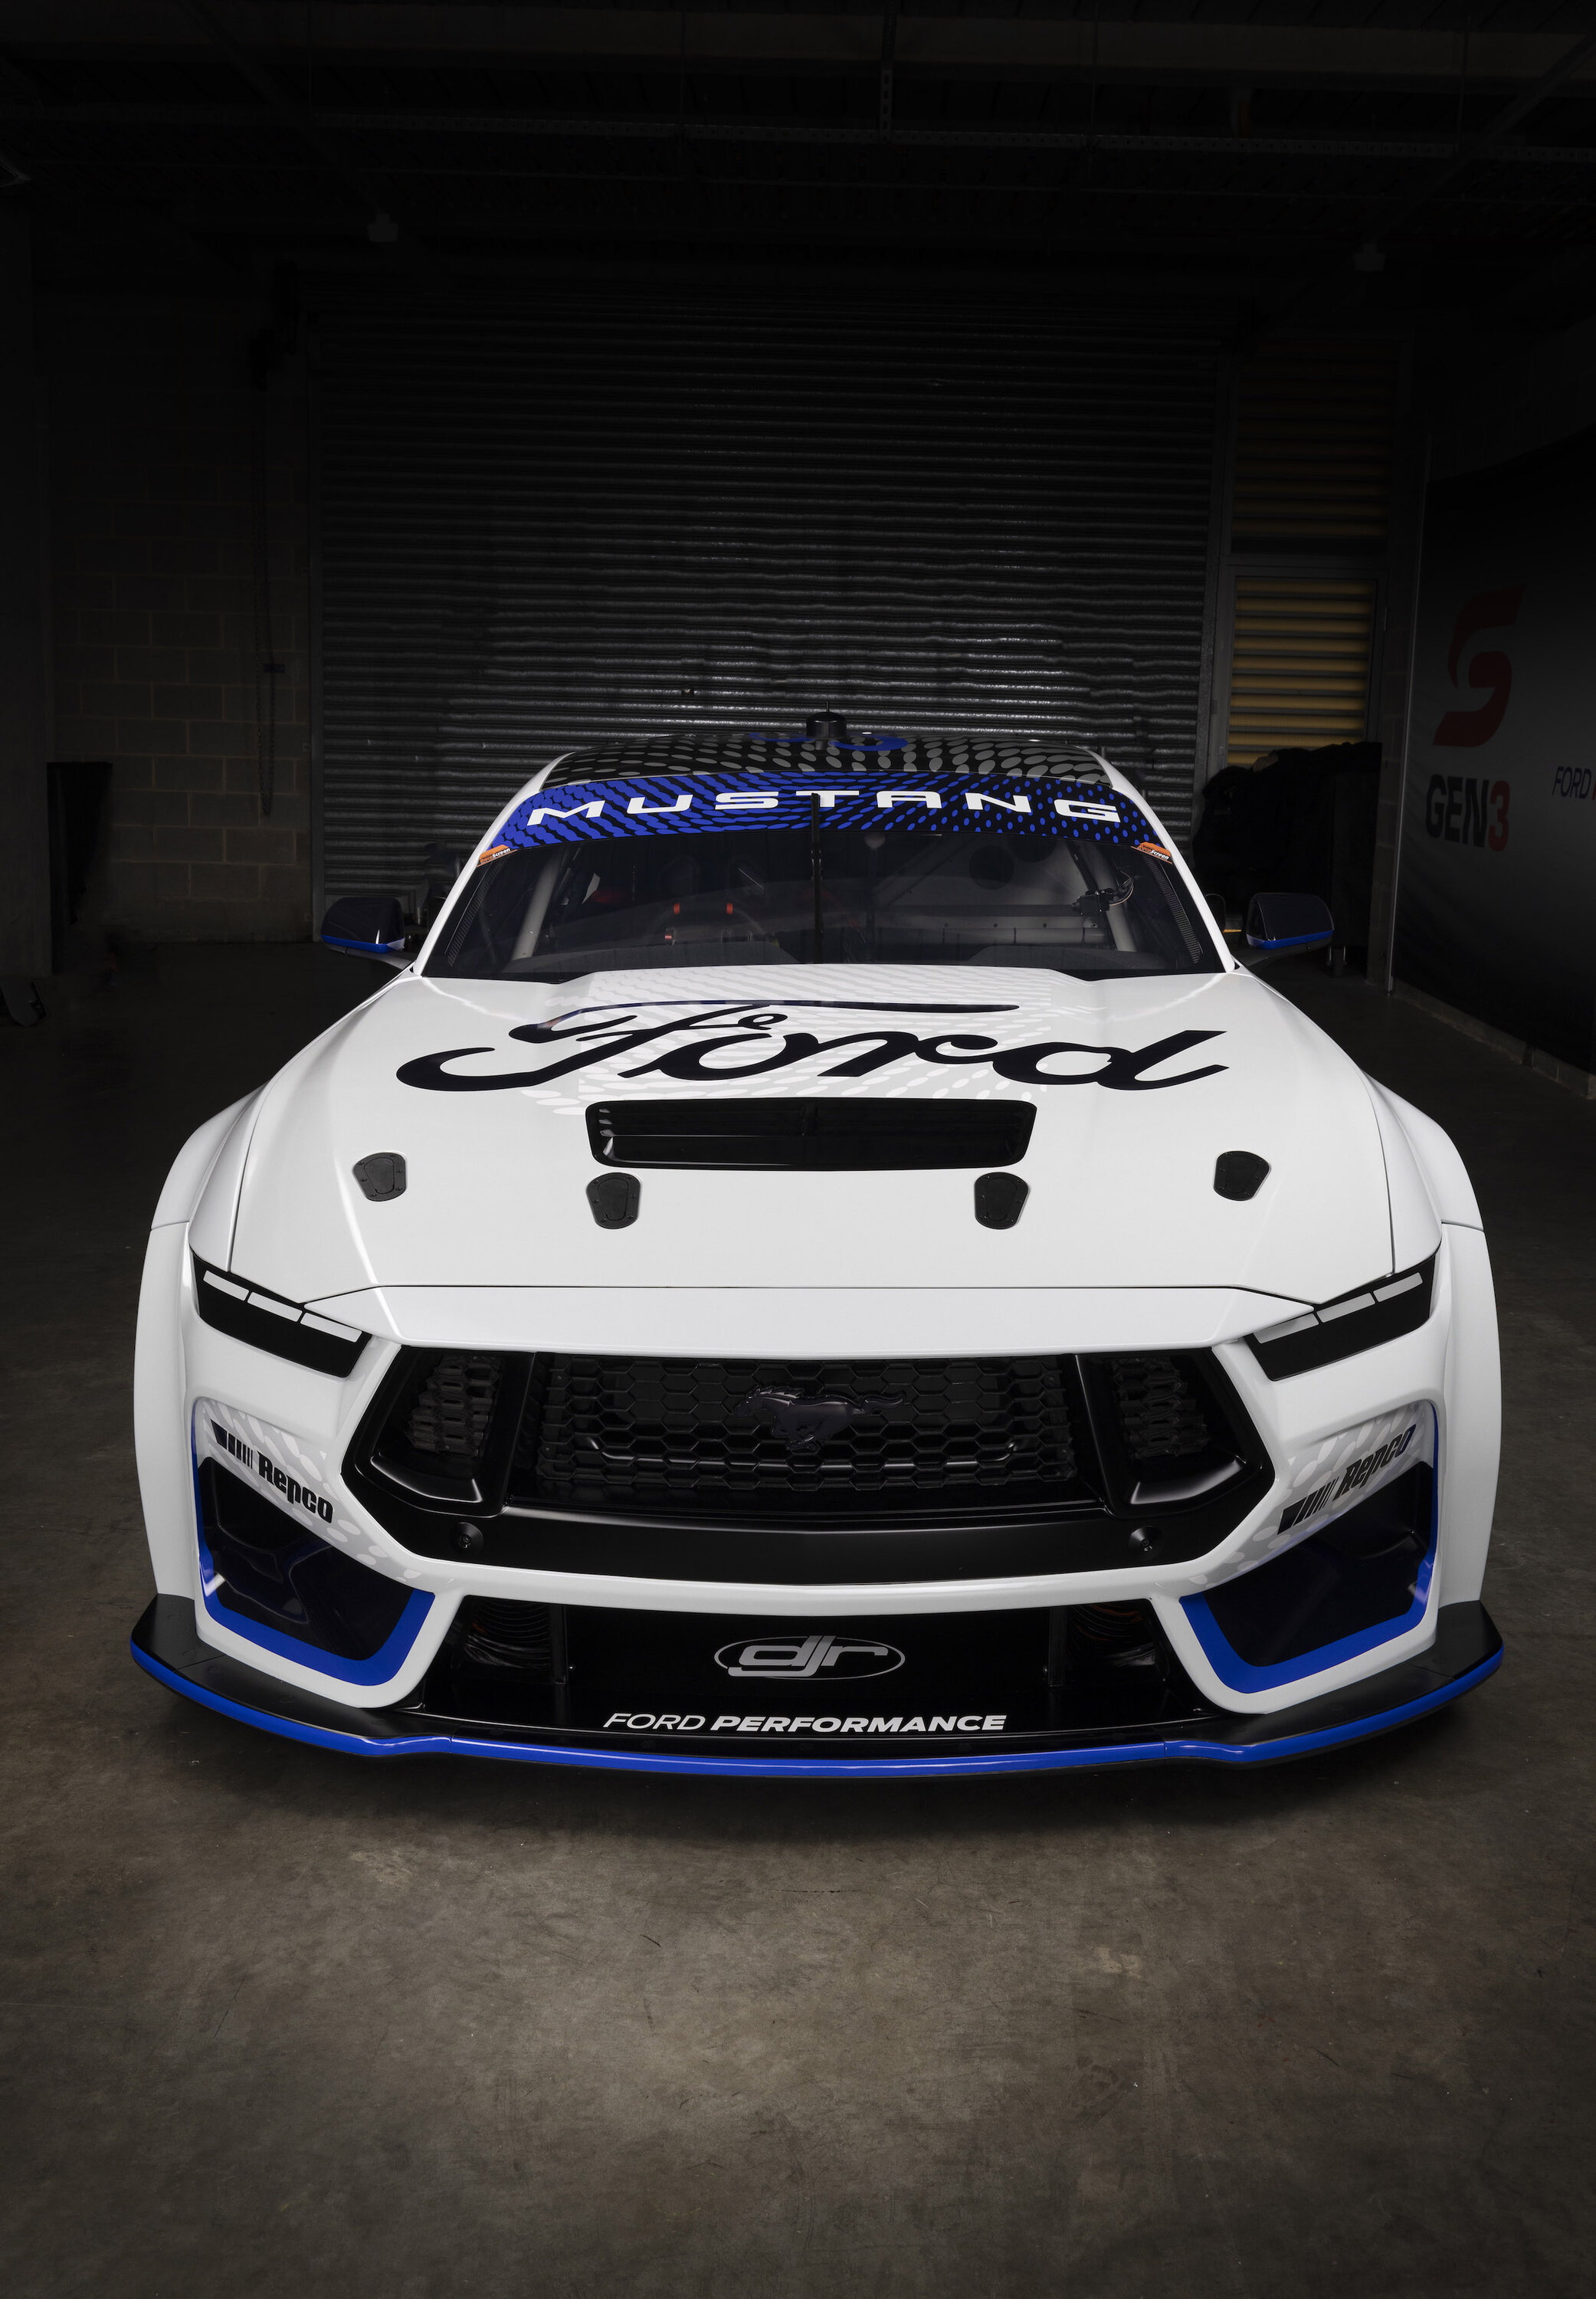 S650 Mustang All-New Ford Mustang (S650) GT Supercars Race Car Revealed at Bathurst 1000 EV-11-22-1J1A0634